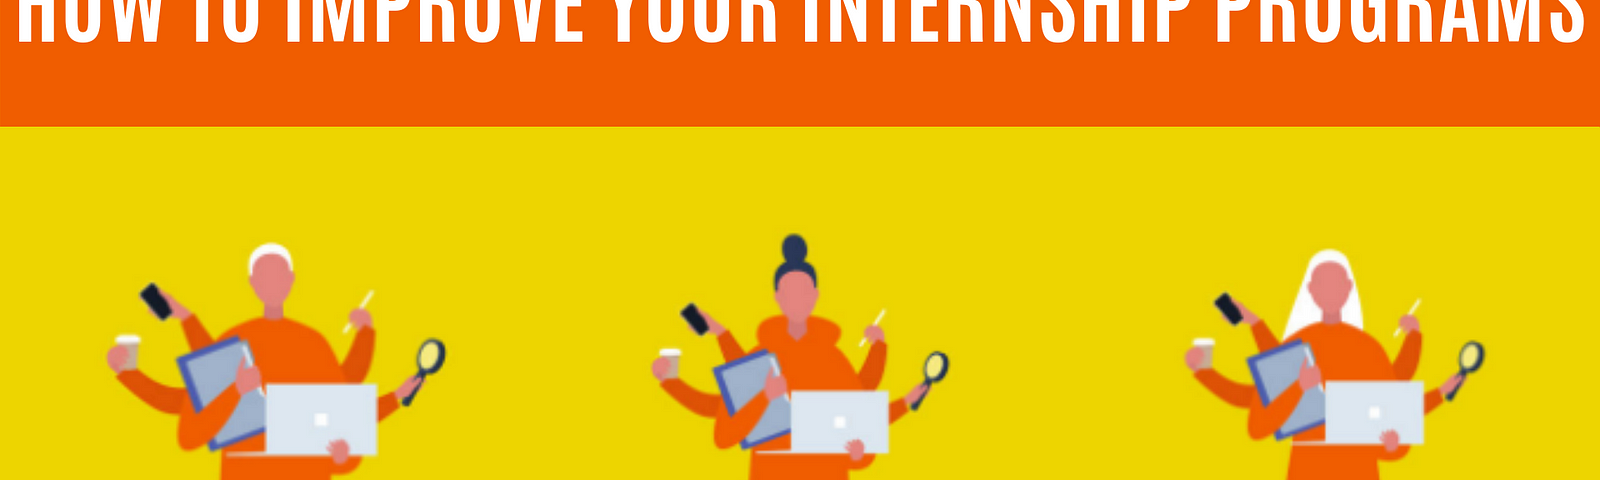 How to Improve Your Internship Programs? We Have a Few Tips For You